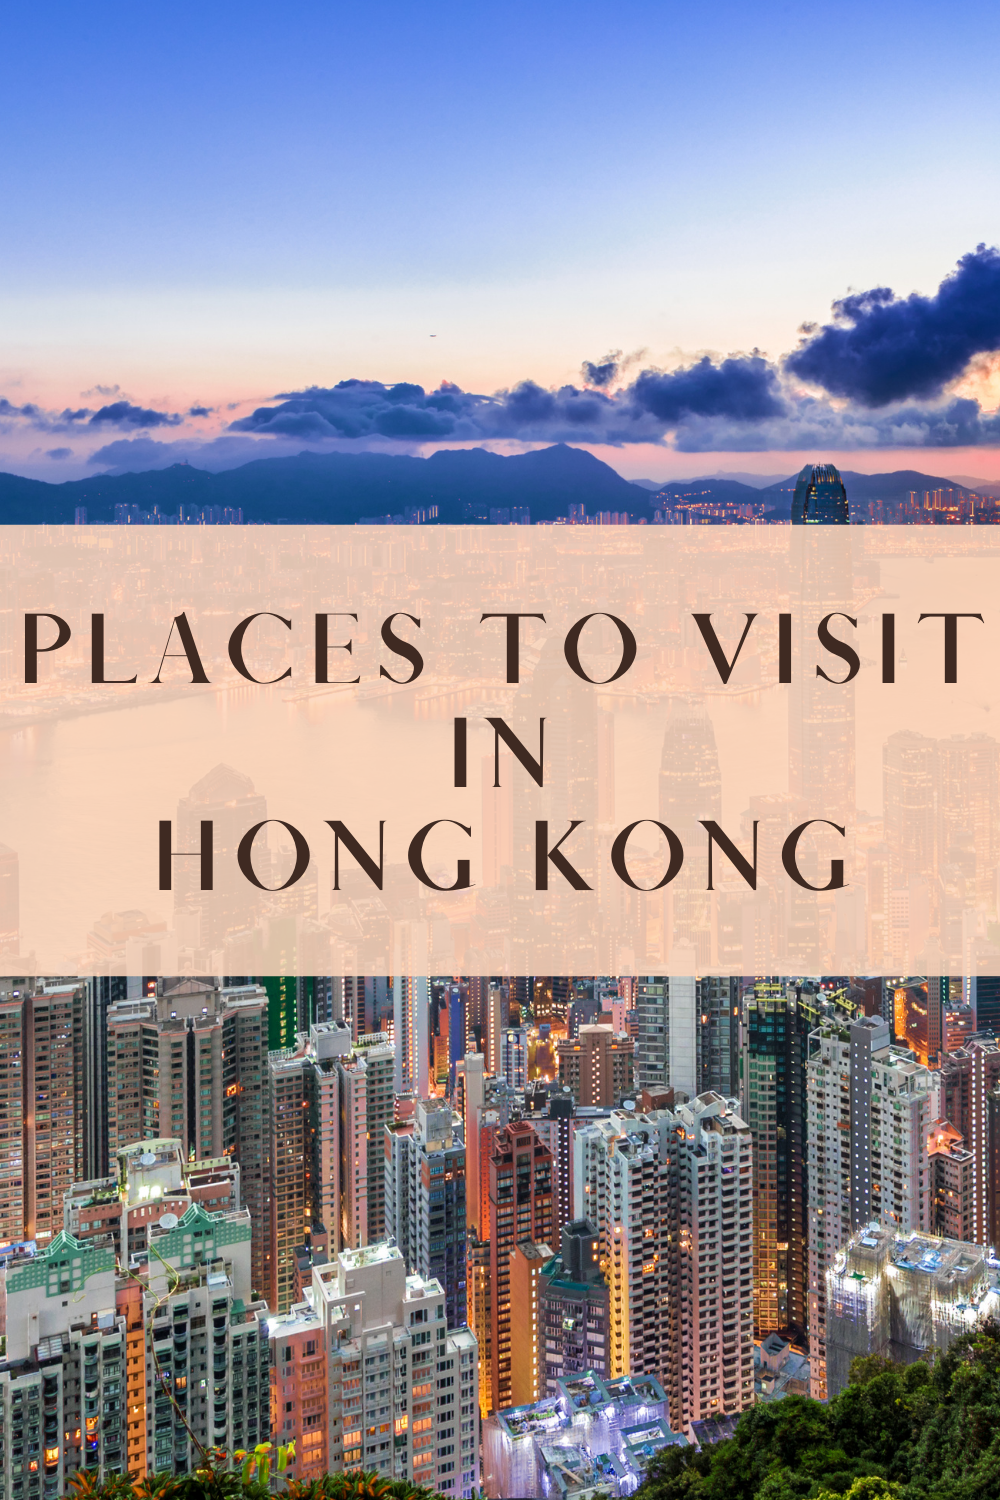 Places to visit in Hong Kong